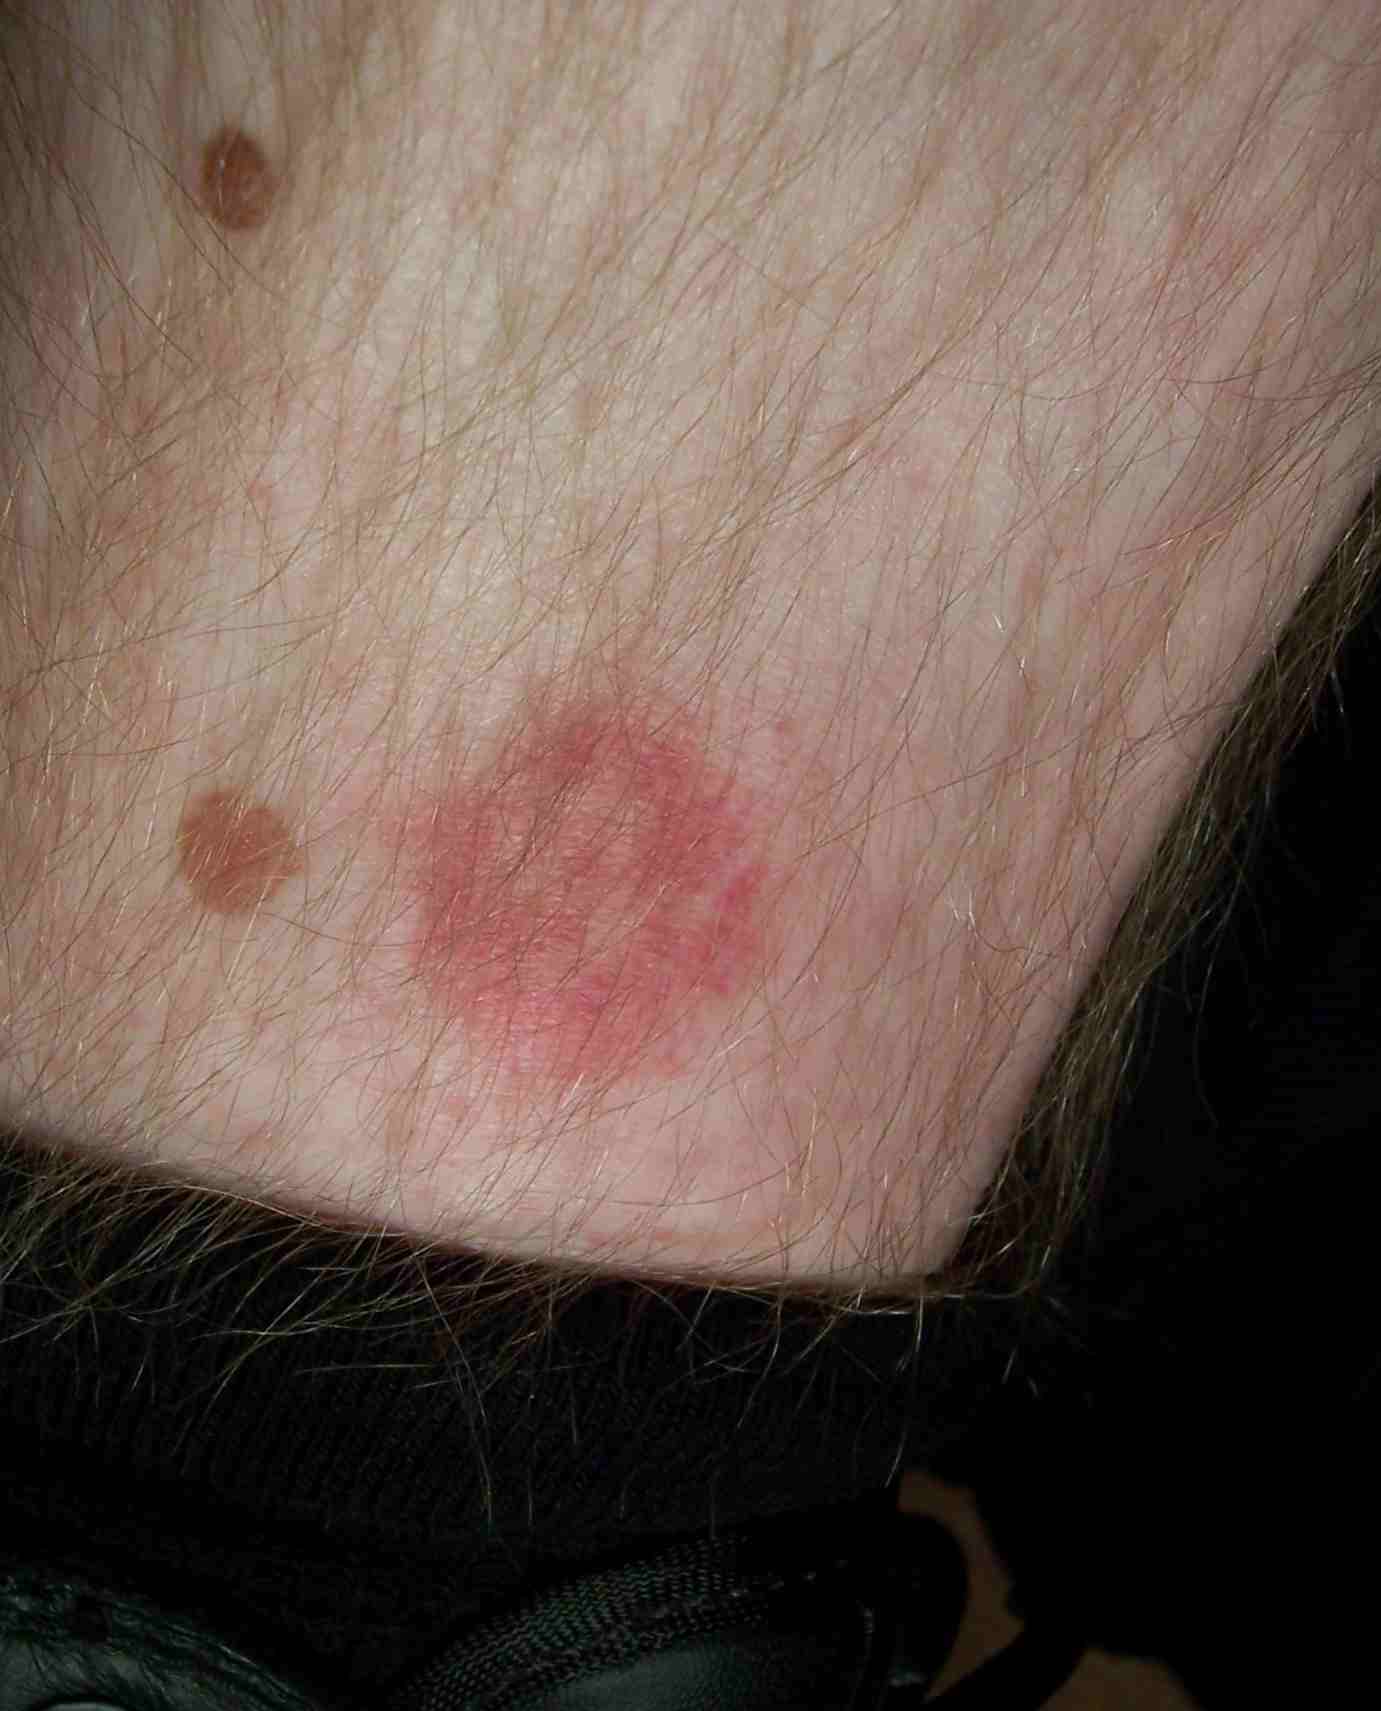 picture of lyme disease bite #11